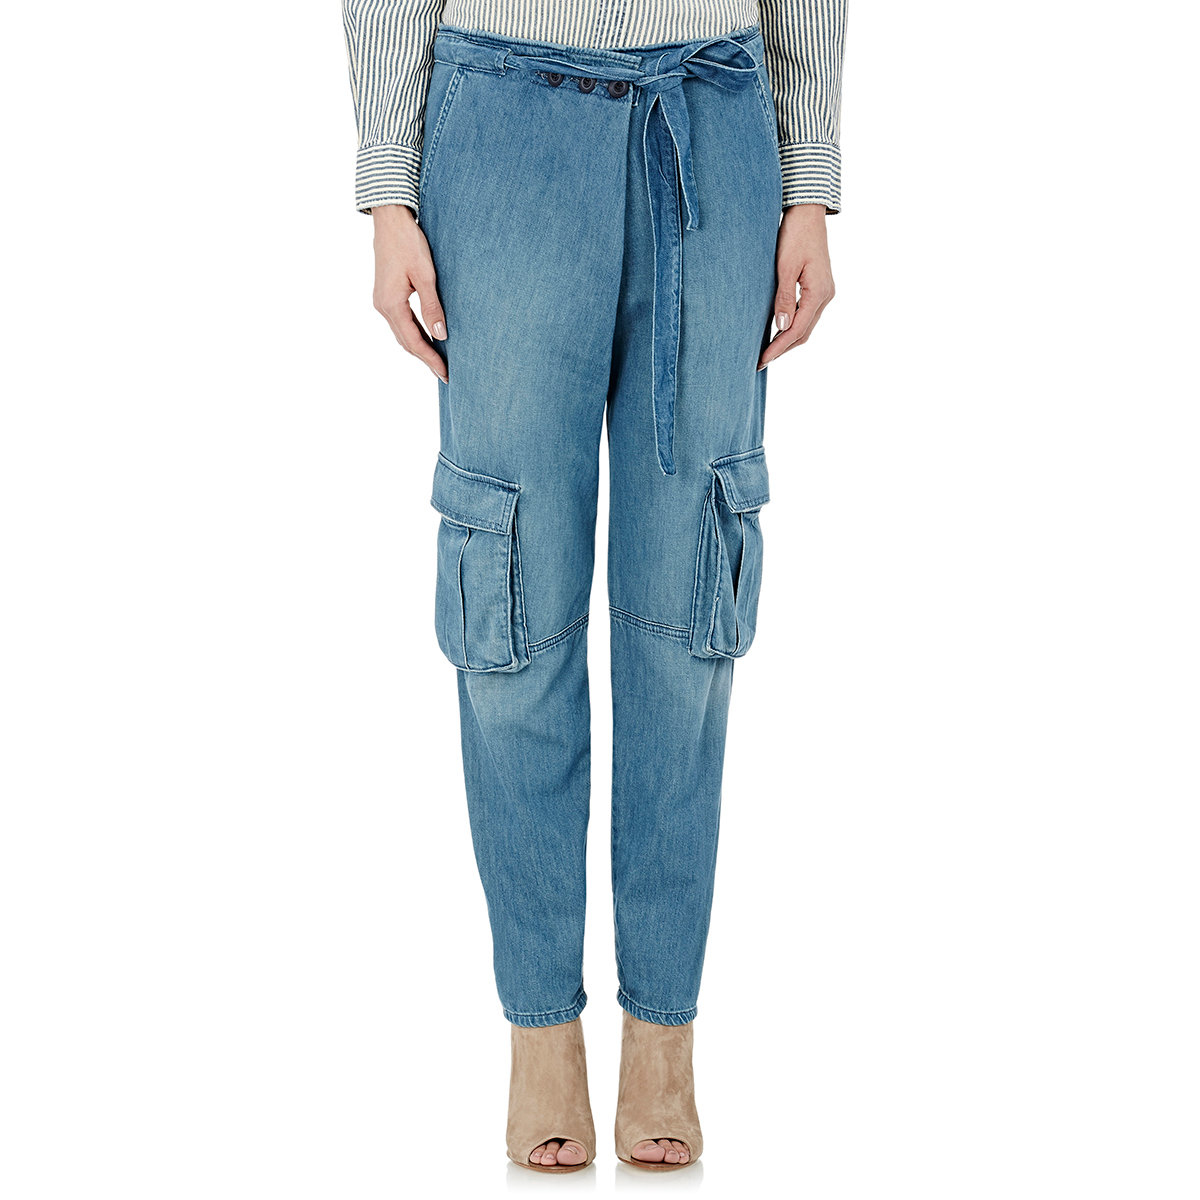 Lyst - Current/Elliott Women's The Crossover Pant Cargo Jeans in Blue